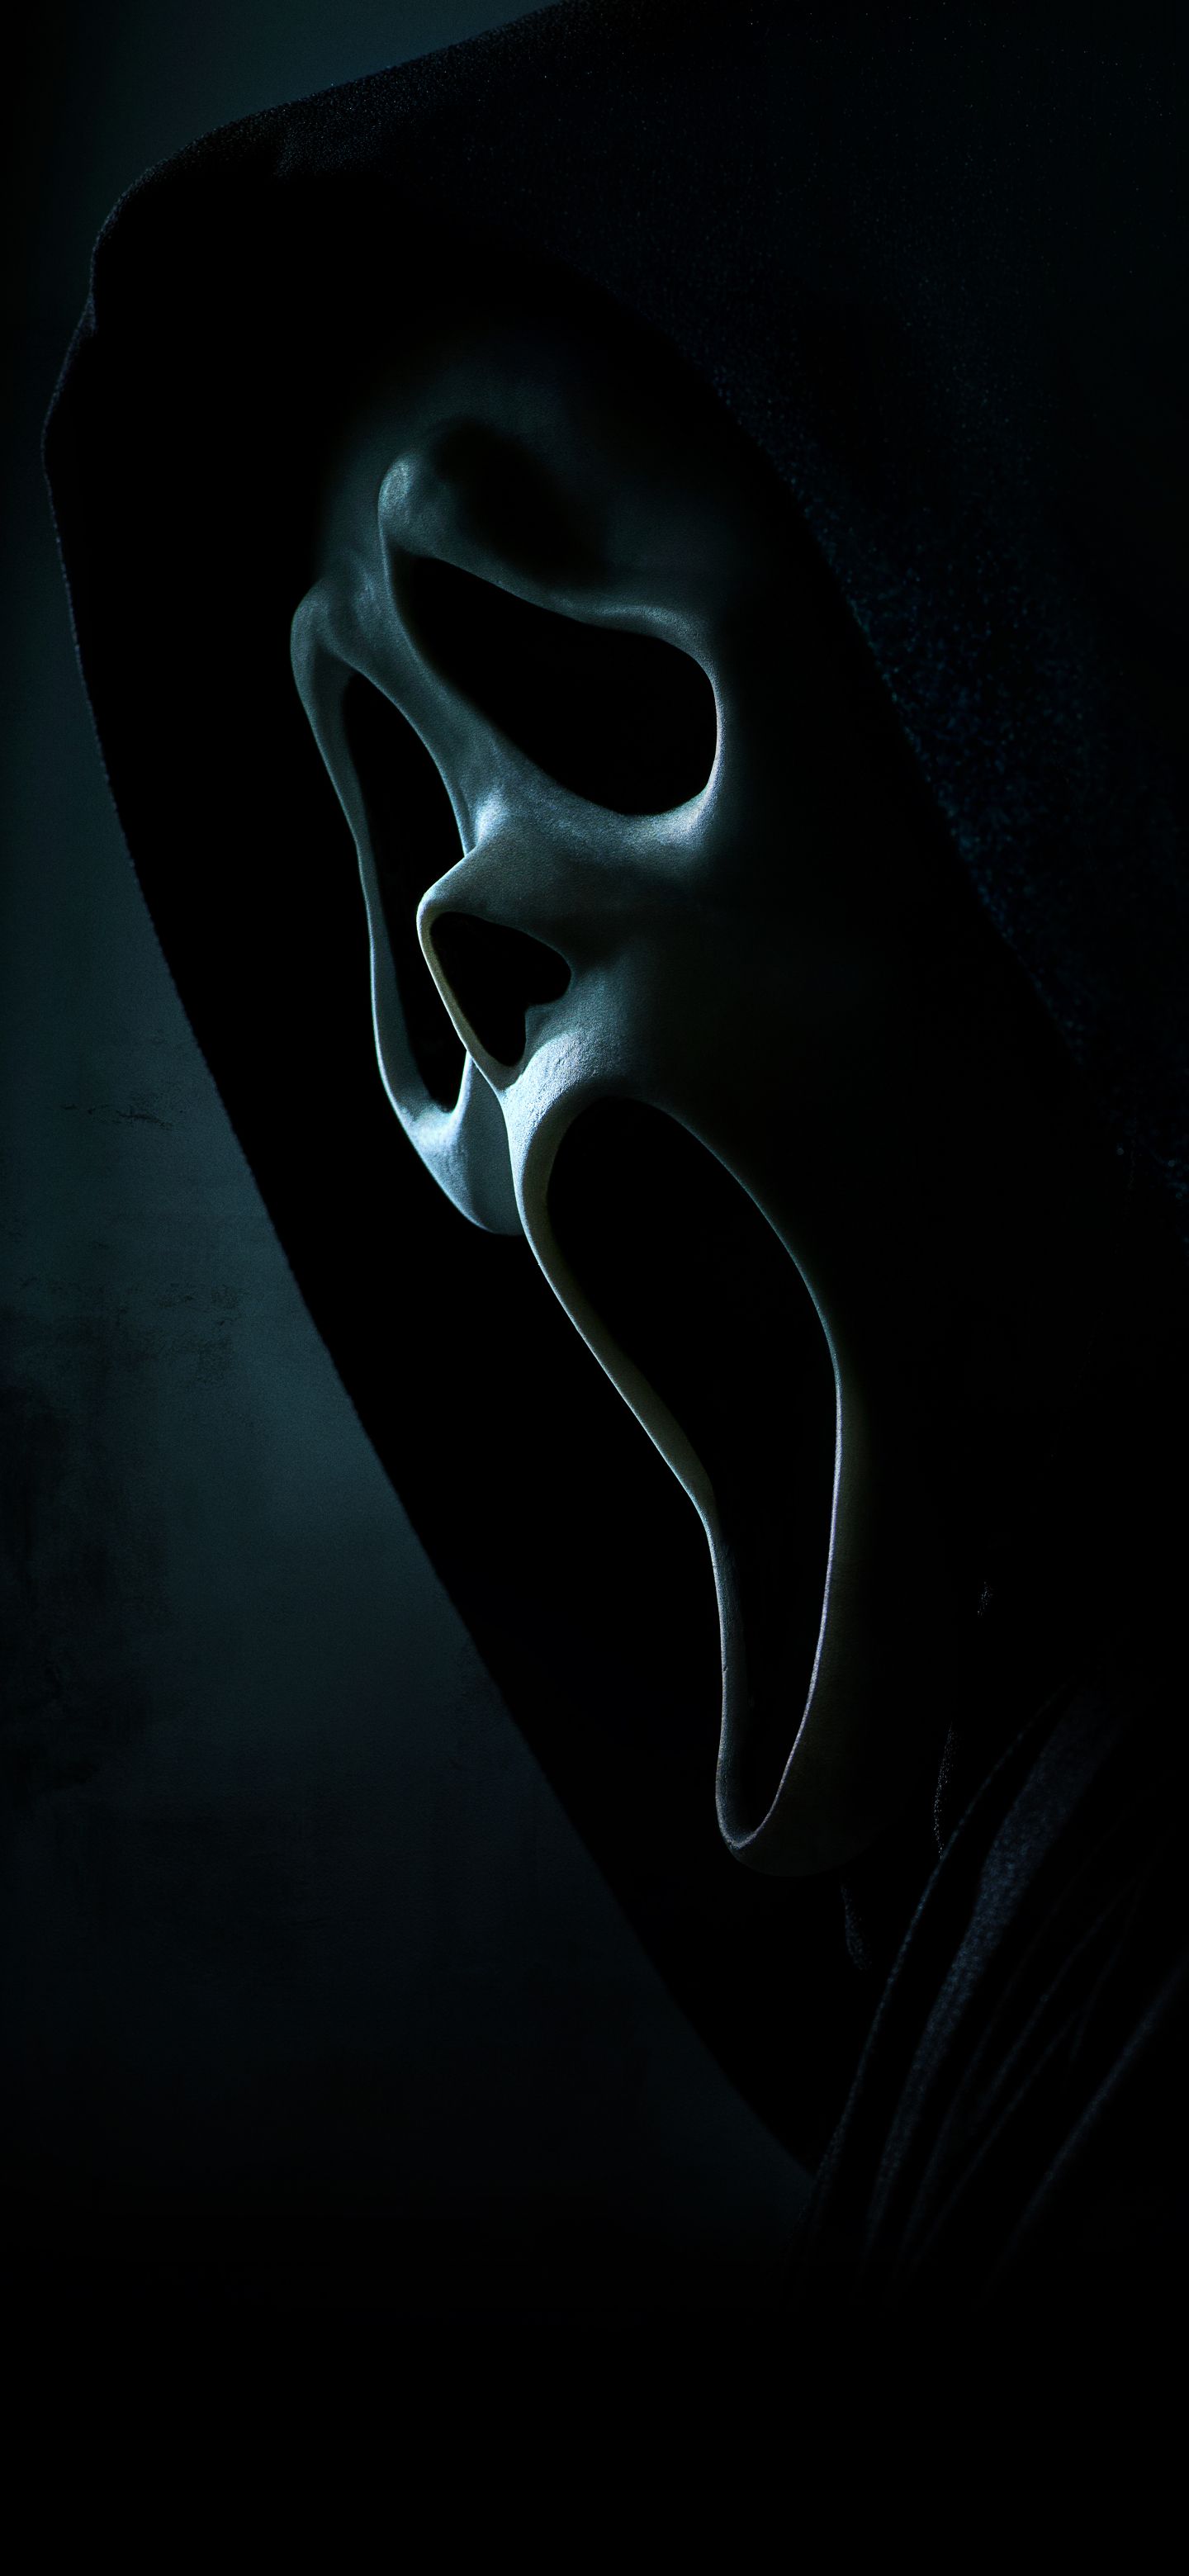 Scream 5 2022 4k Iphone 11 Wallpapers Free Download - Ghostface